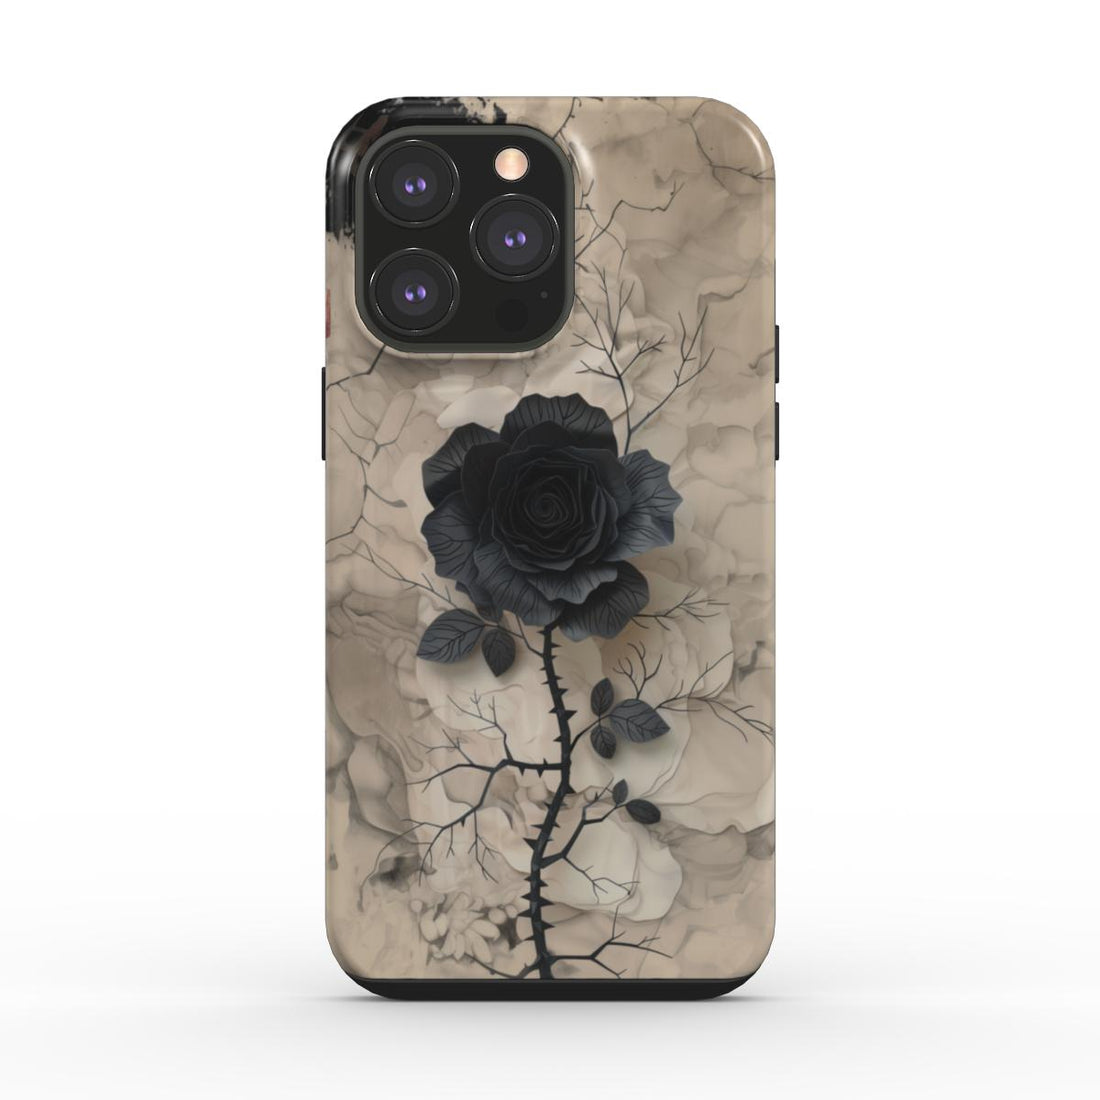 The Rose of Shadows Phone Case